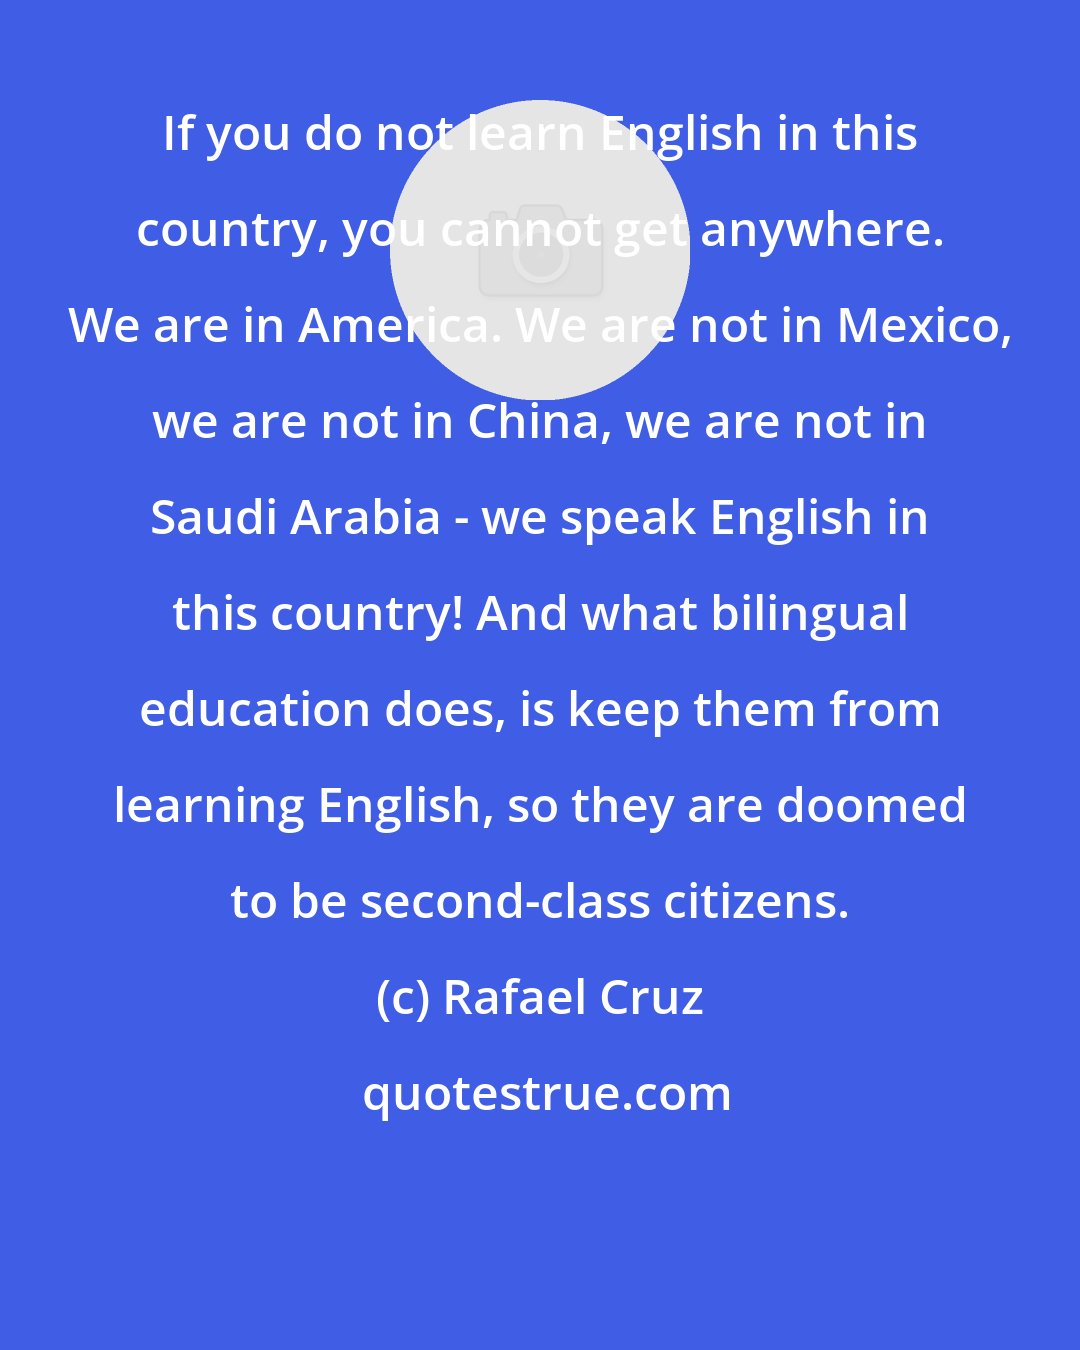 Rafael Cruz: If you do not learn English in this country, you cannot get anywhere. We are in America. We are not in Mexico, we are not in China, we are not in Saudi Arabia - we speak English in this country! And what bilingual education does, is keep them from learning English, so they are doomed to be second-class citizens.